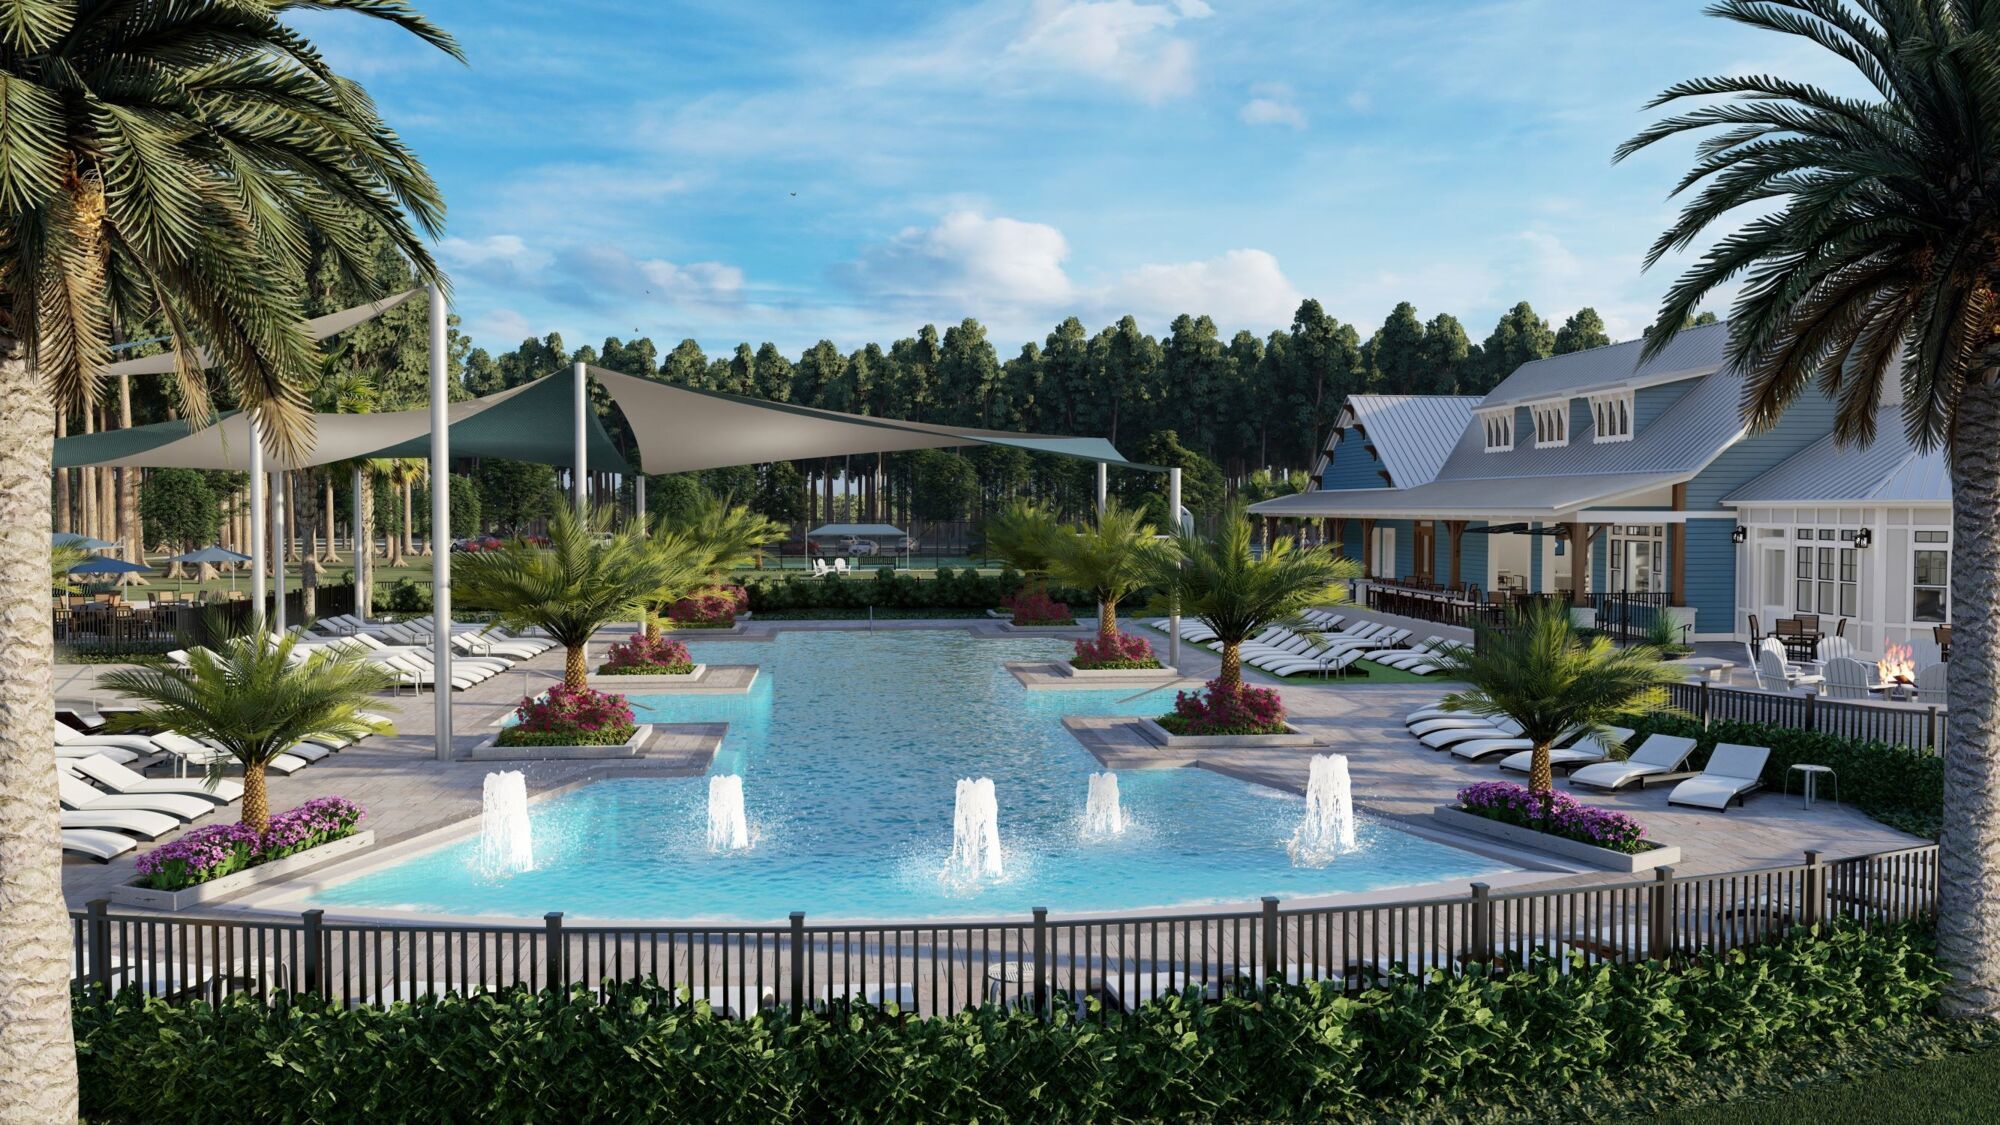 Rendering of community clubhouse with pool, umbrellas, lounge chairs and palm trees.